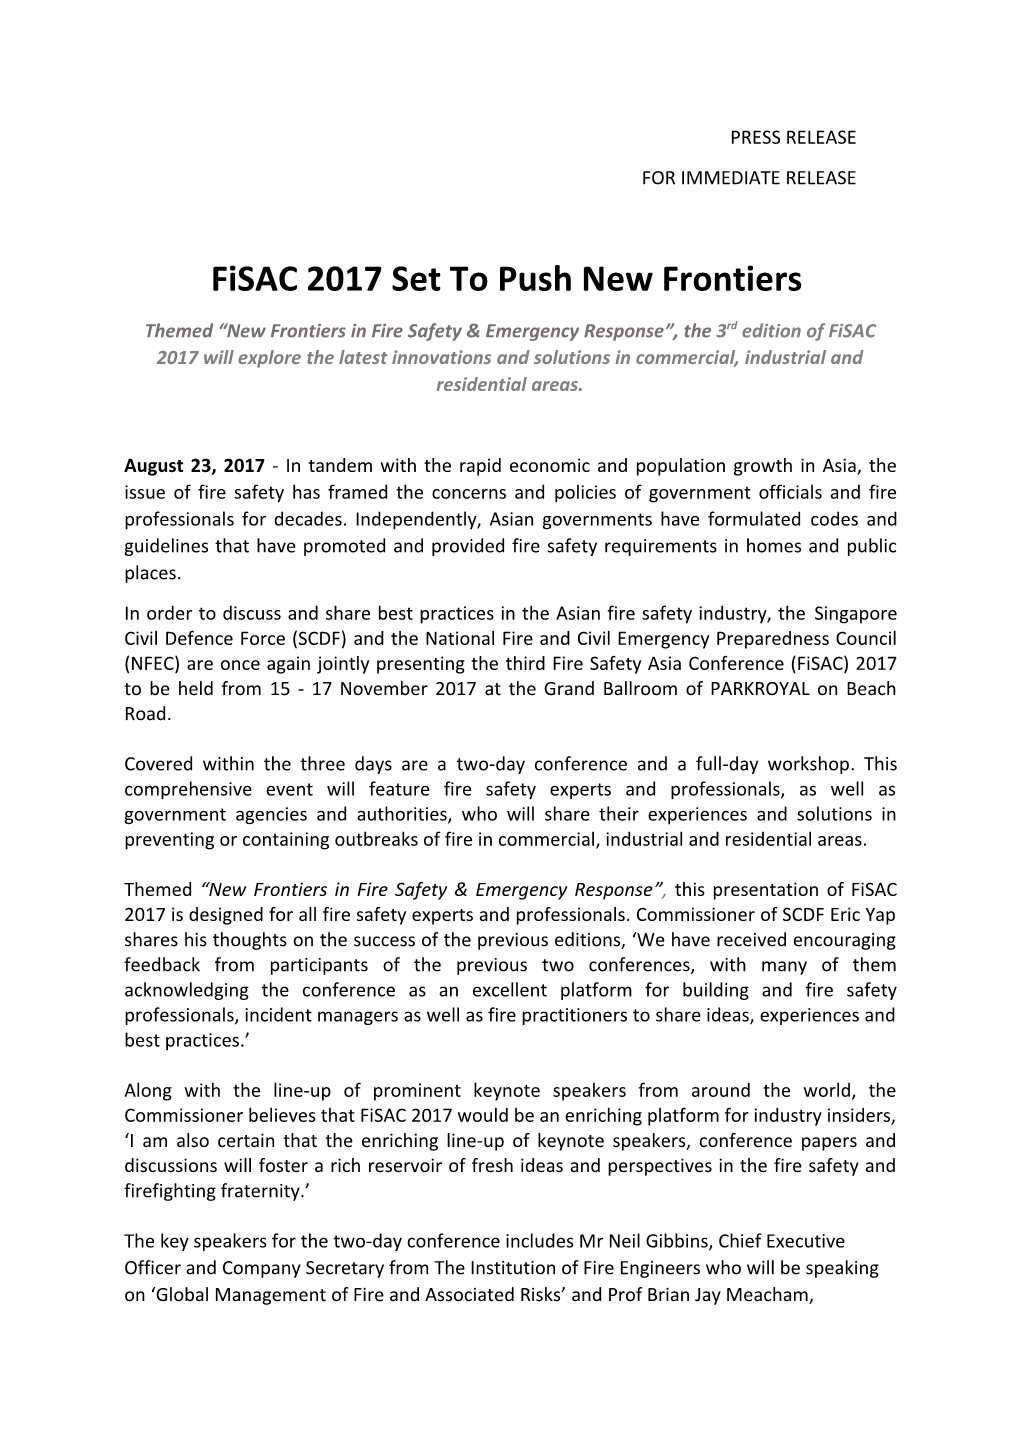 Fisac 2017Set to Push New Frontiers